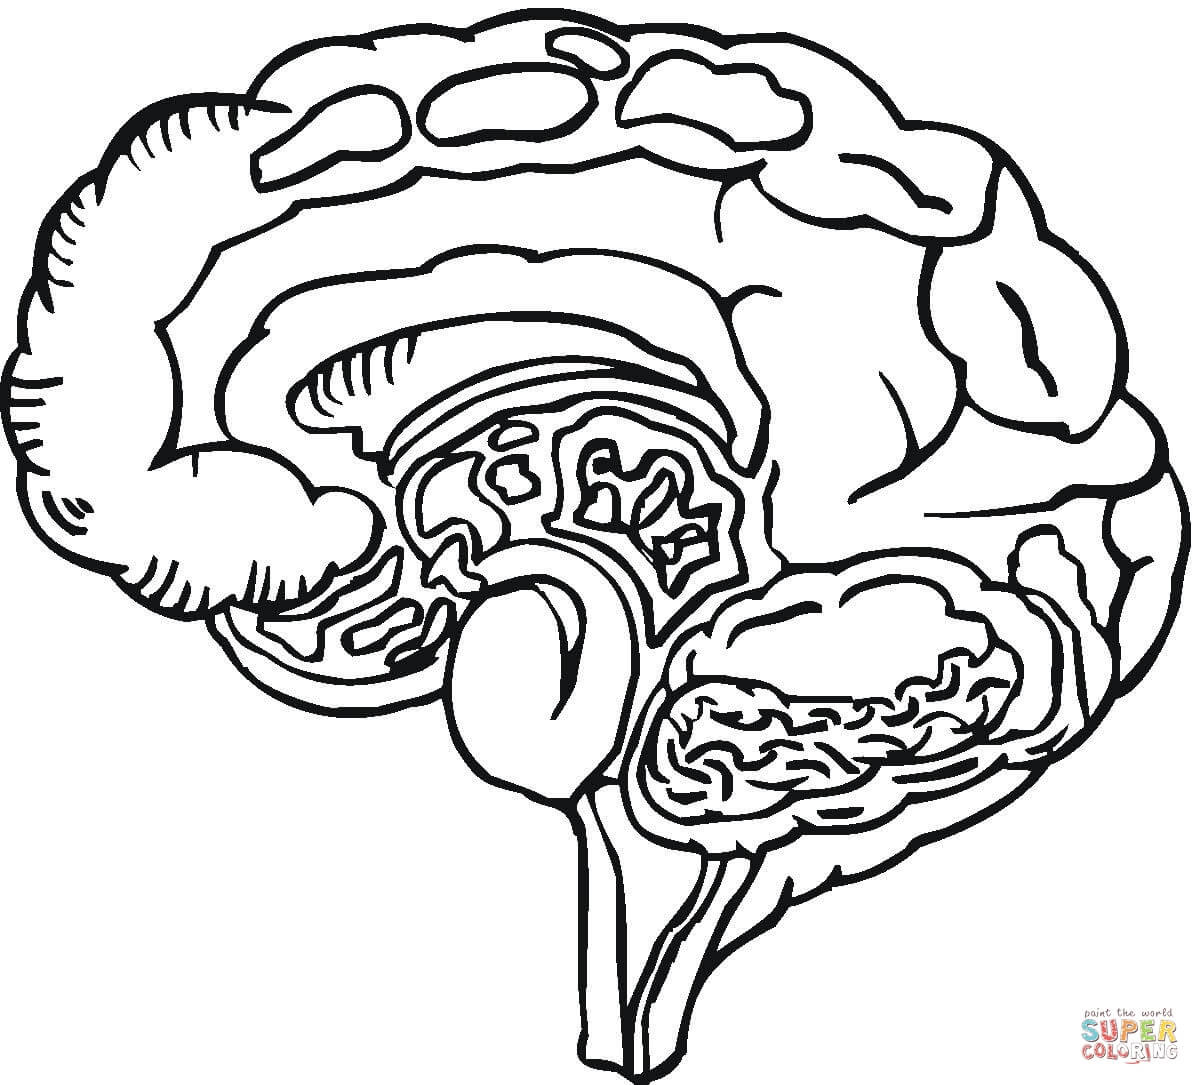 Brain Coloring Sheet
 Human Brain Coloring Page Coloring Home